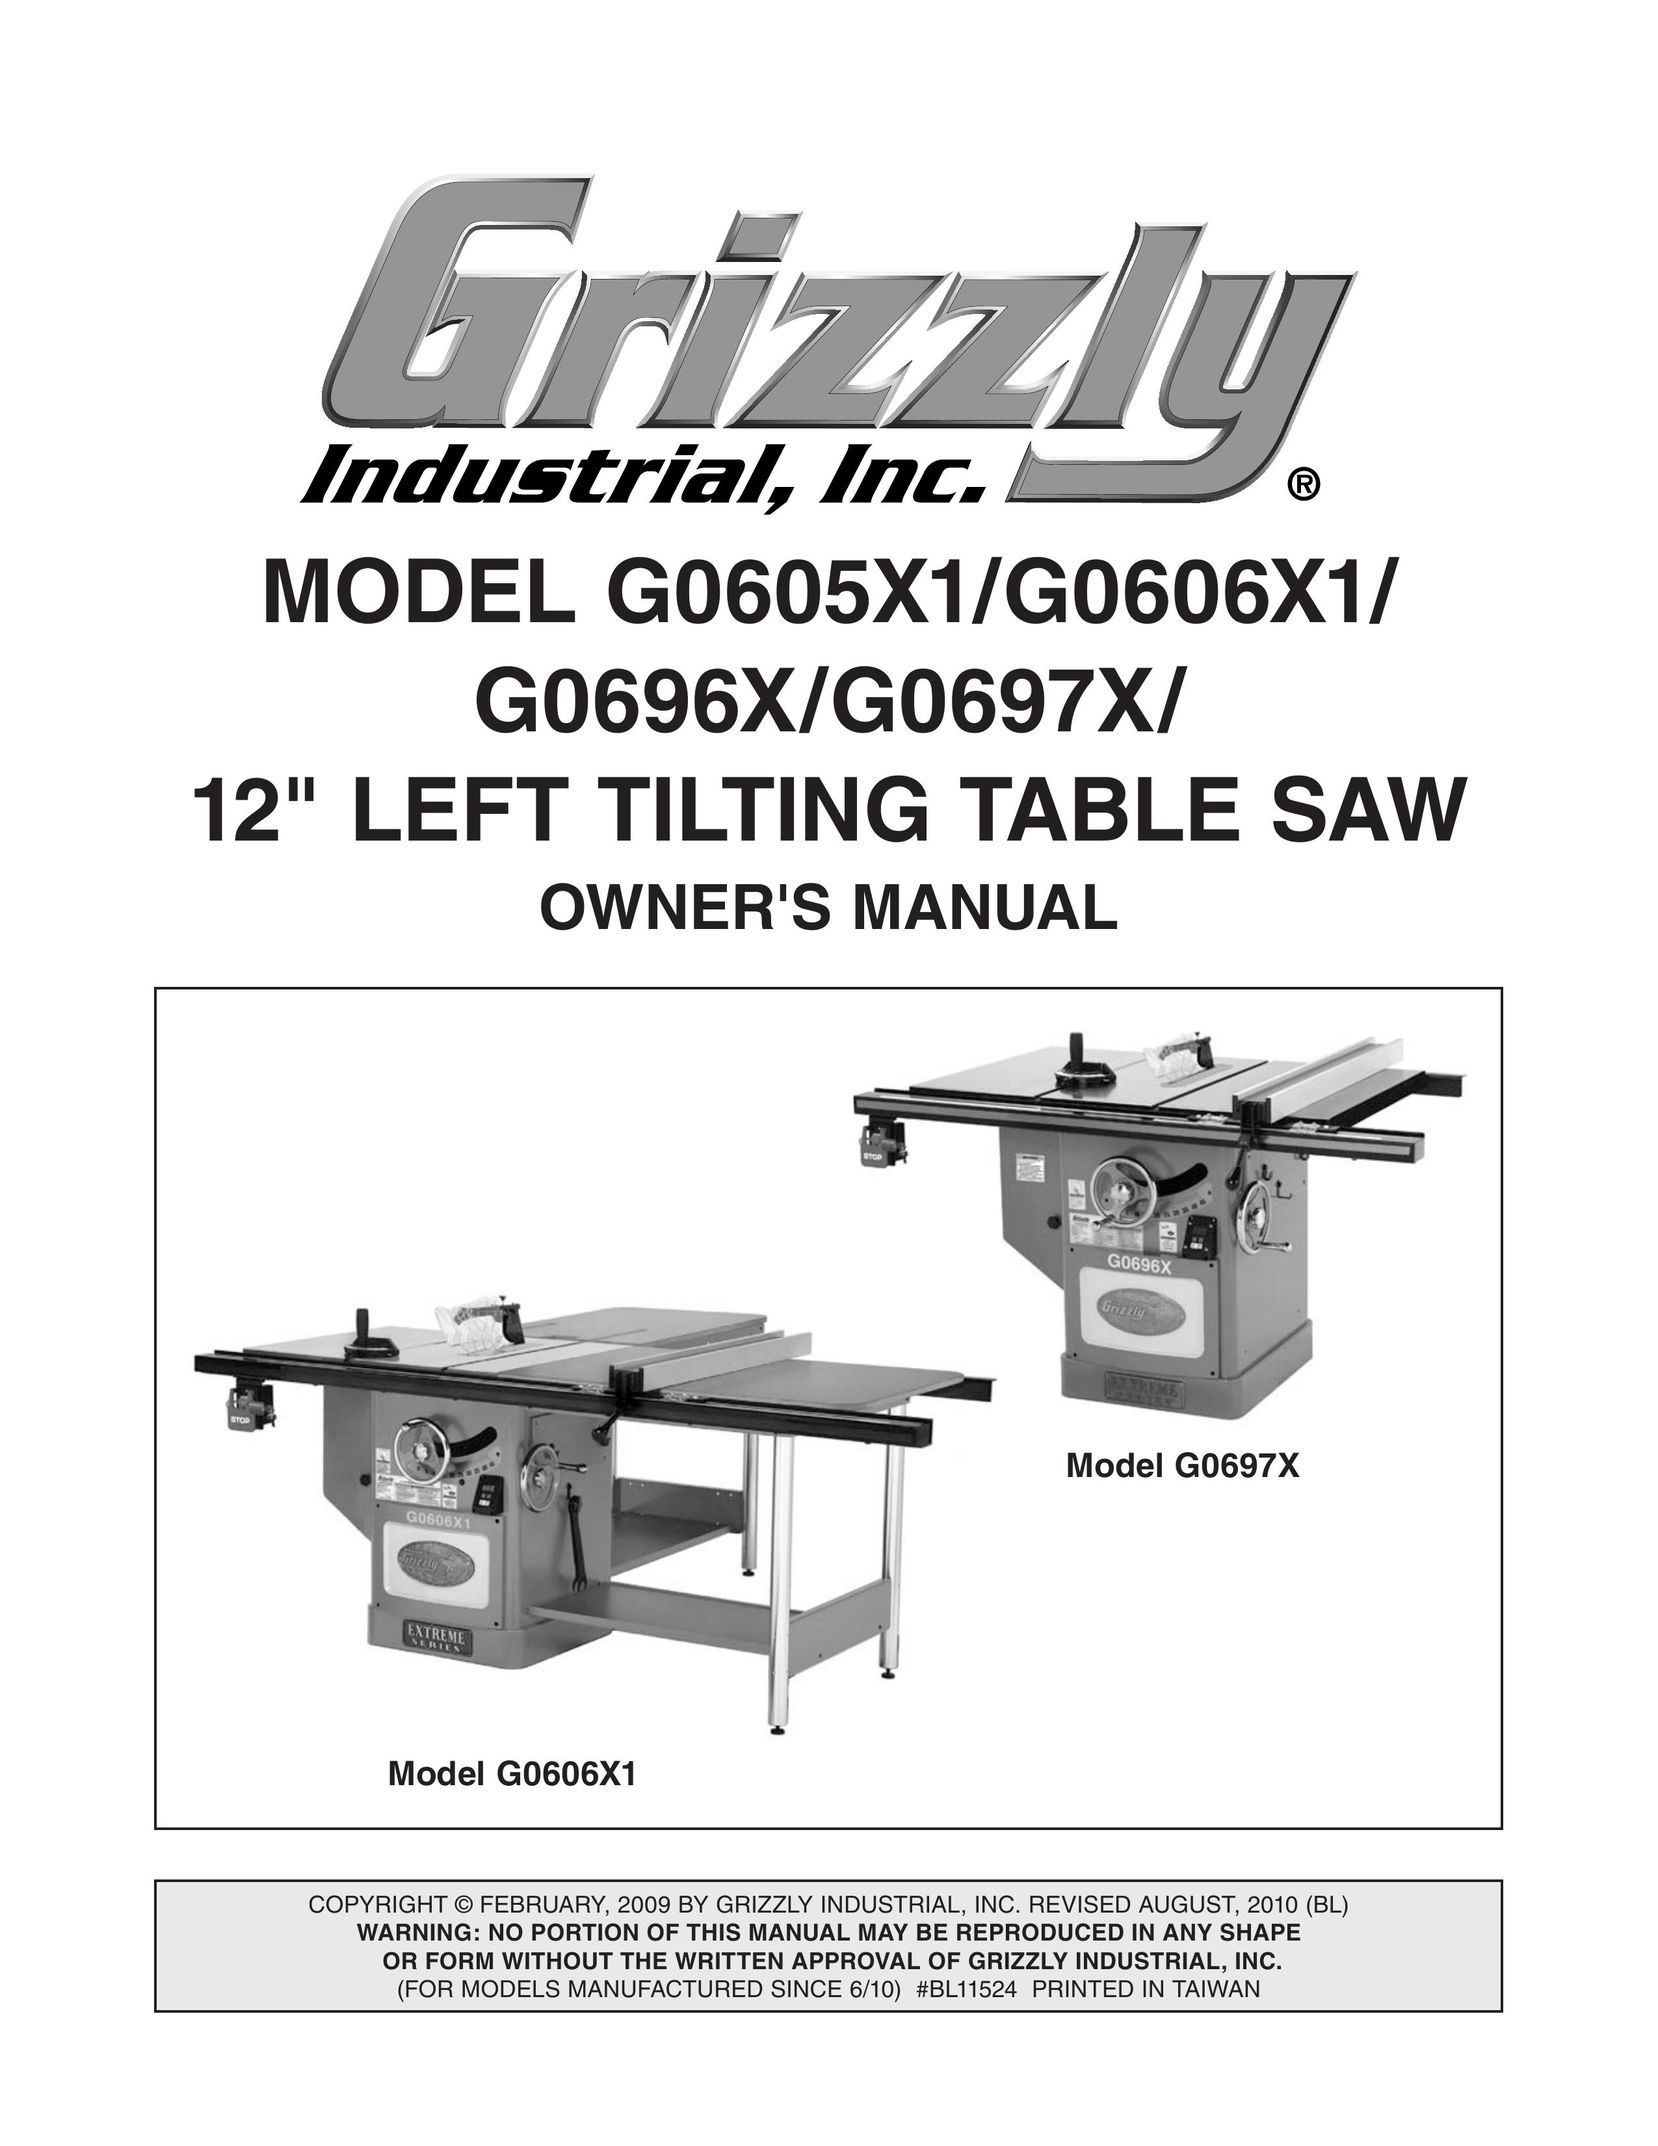 Grizzly G0696X Paint Sprayer User Manual